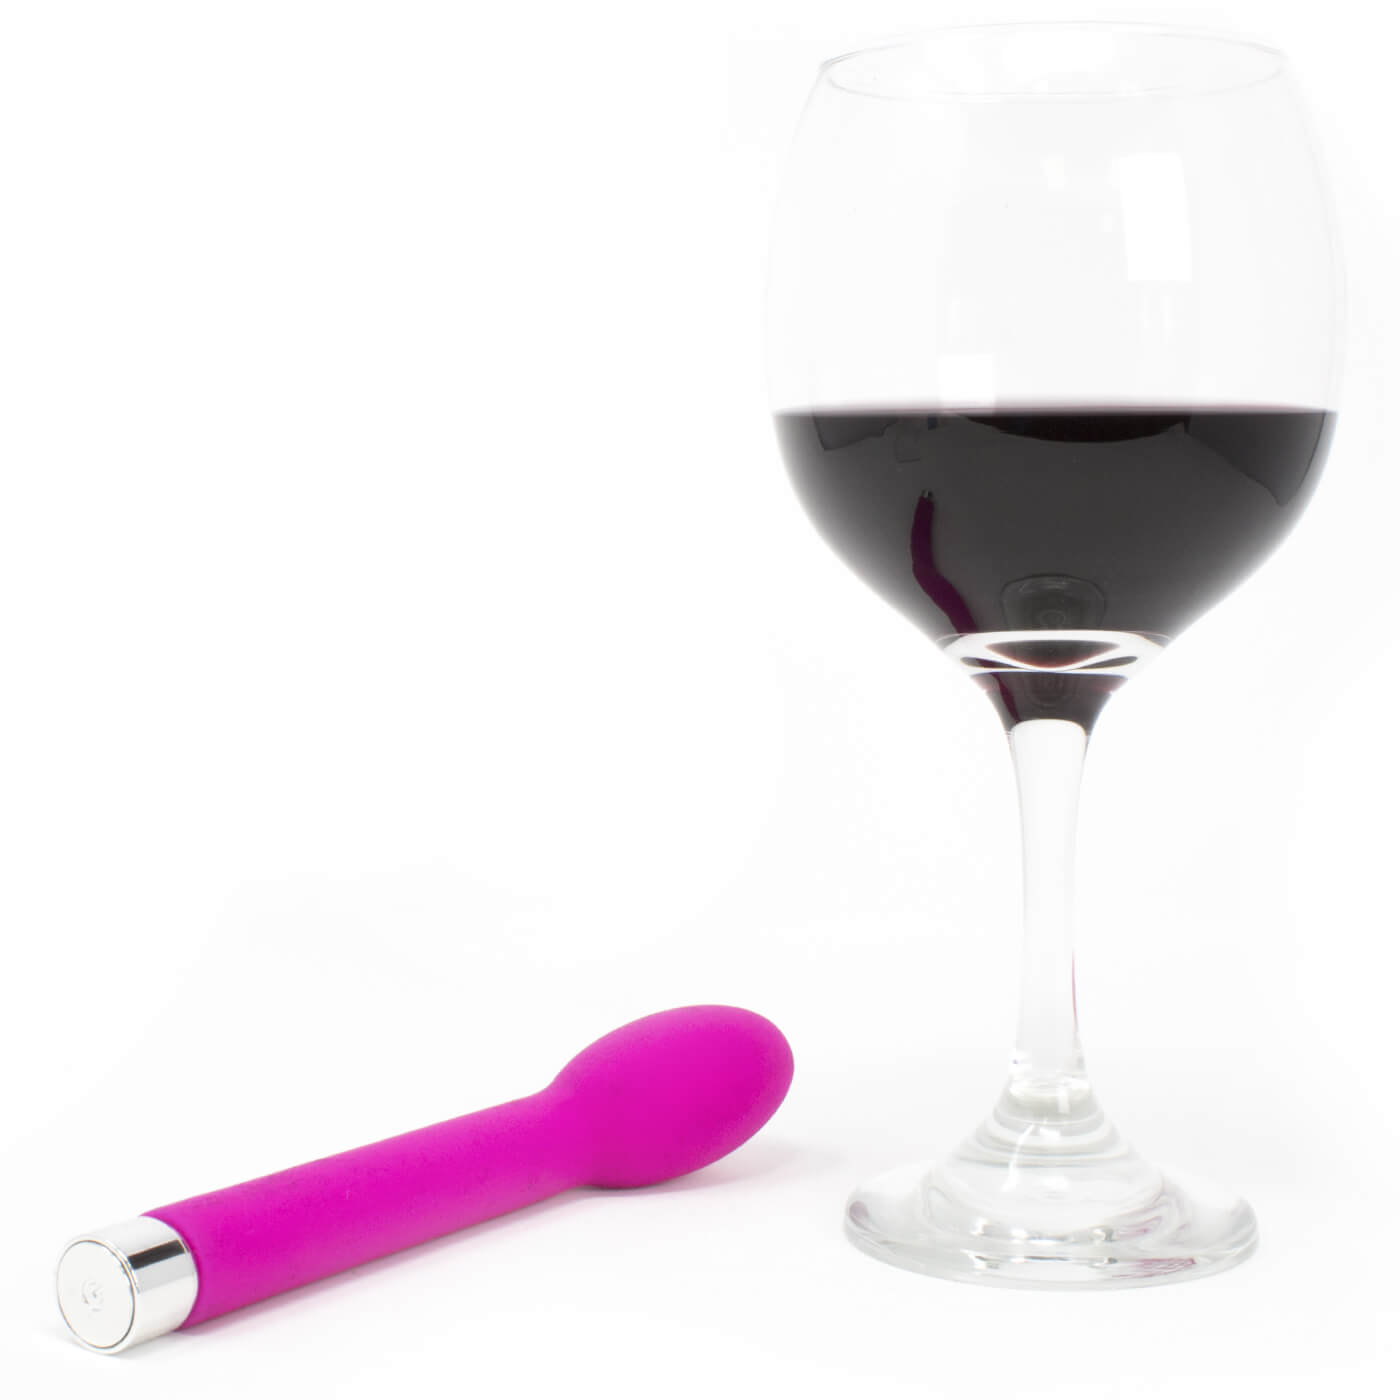 Vedo Gee Slim 10 Function Extra Quiet USB Rechargeable G-Spot Vibrator